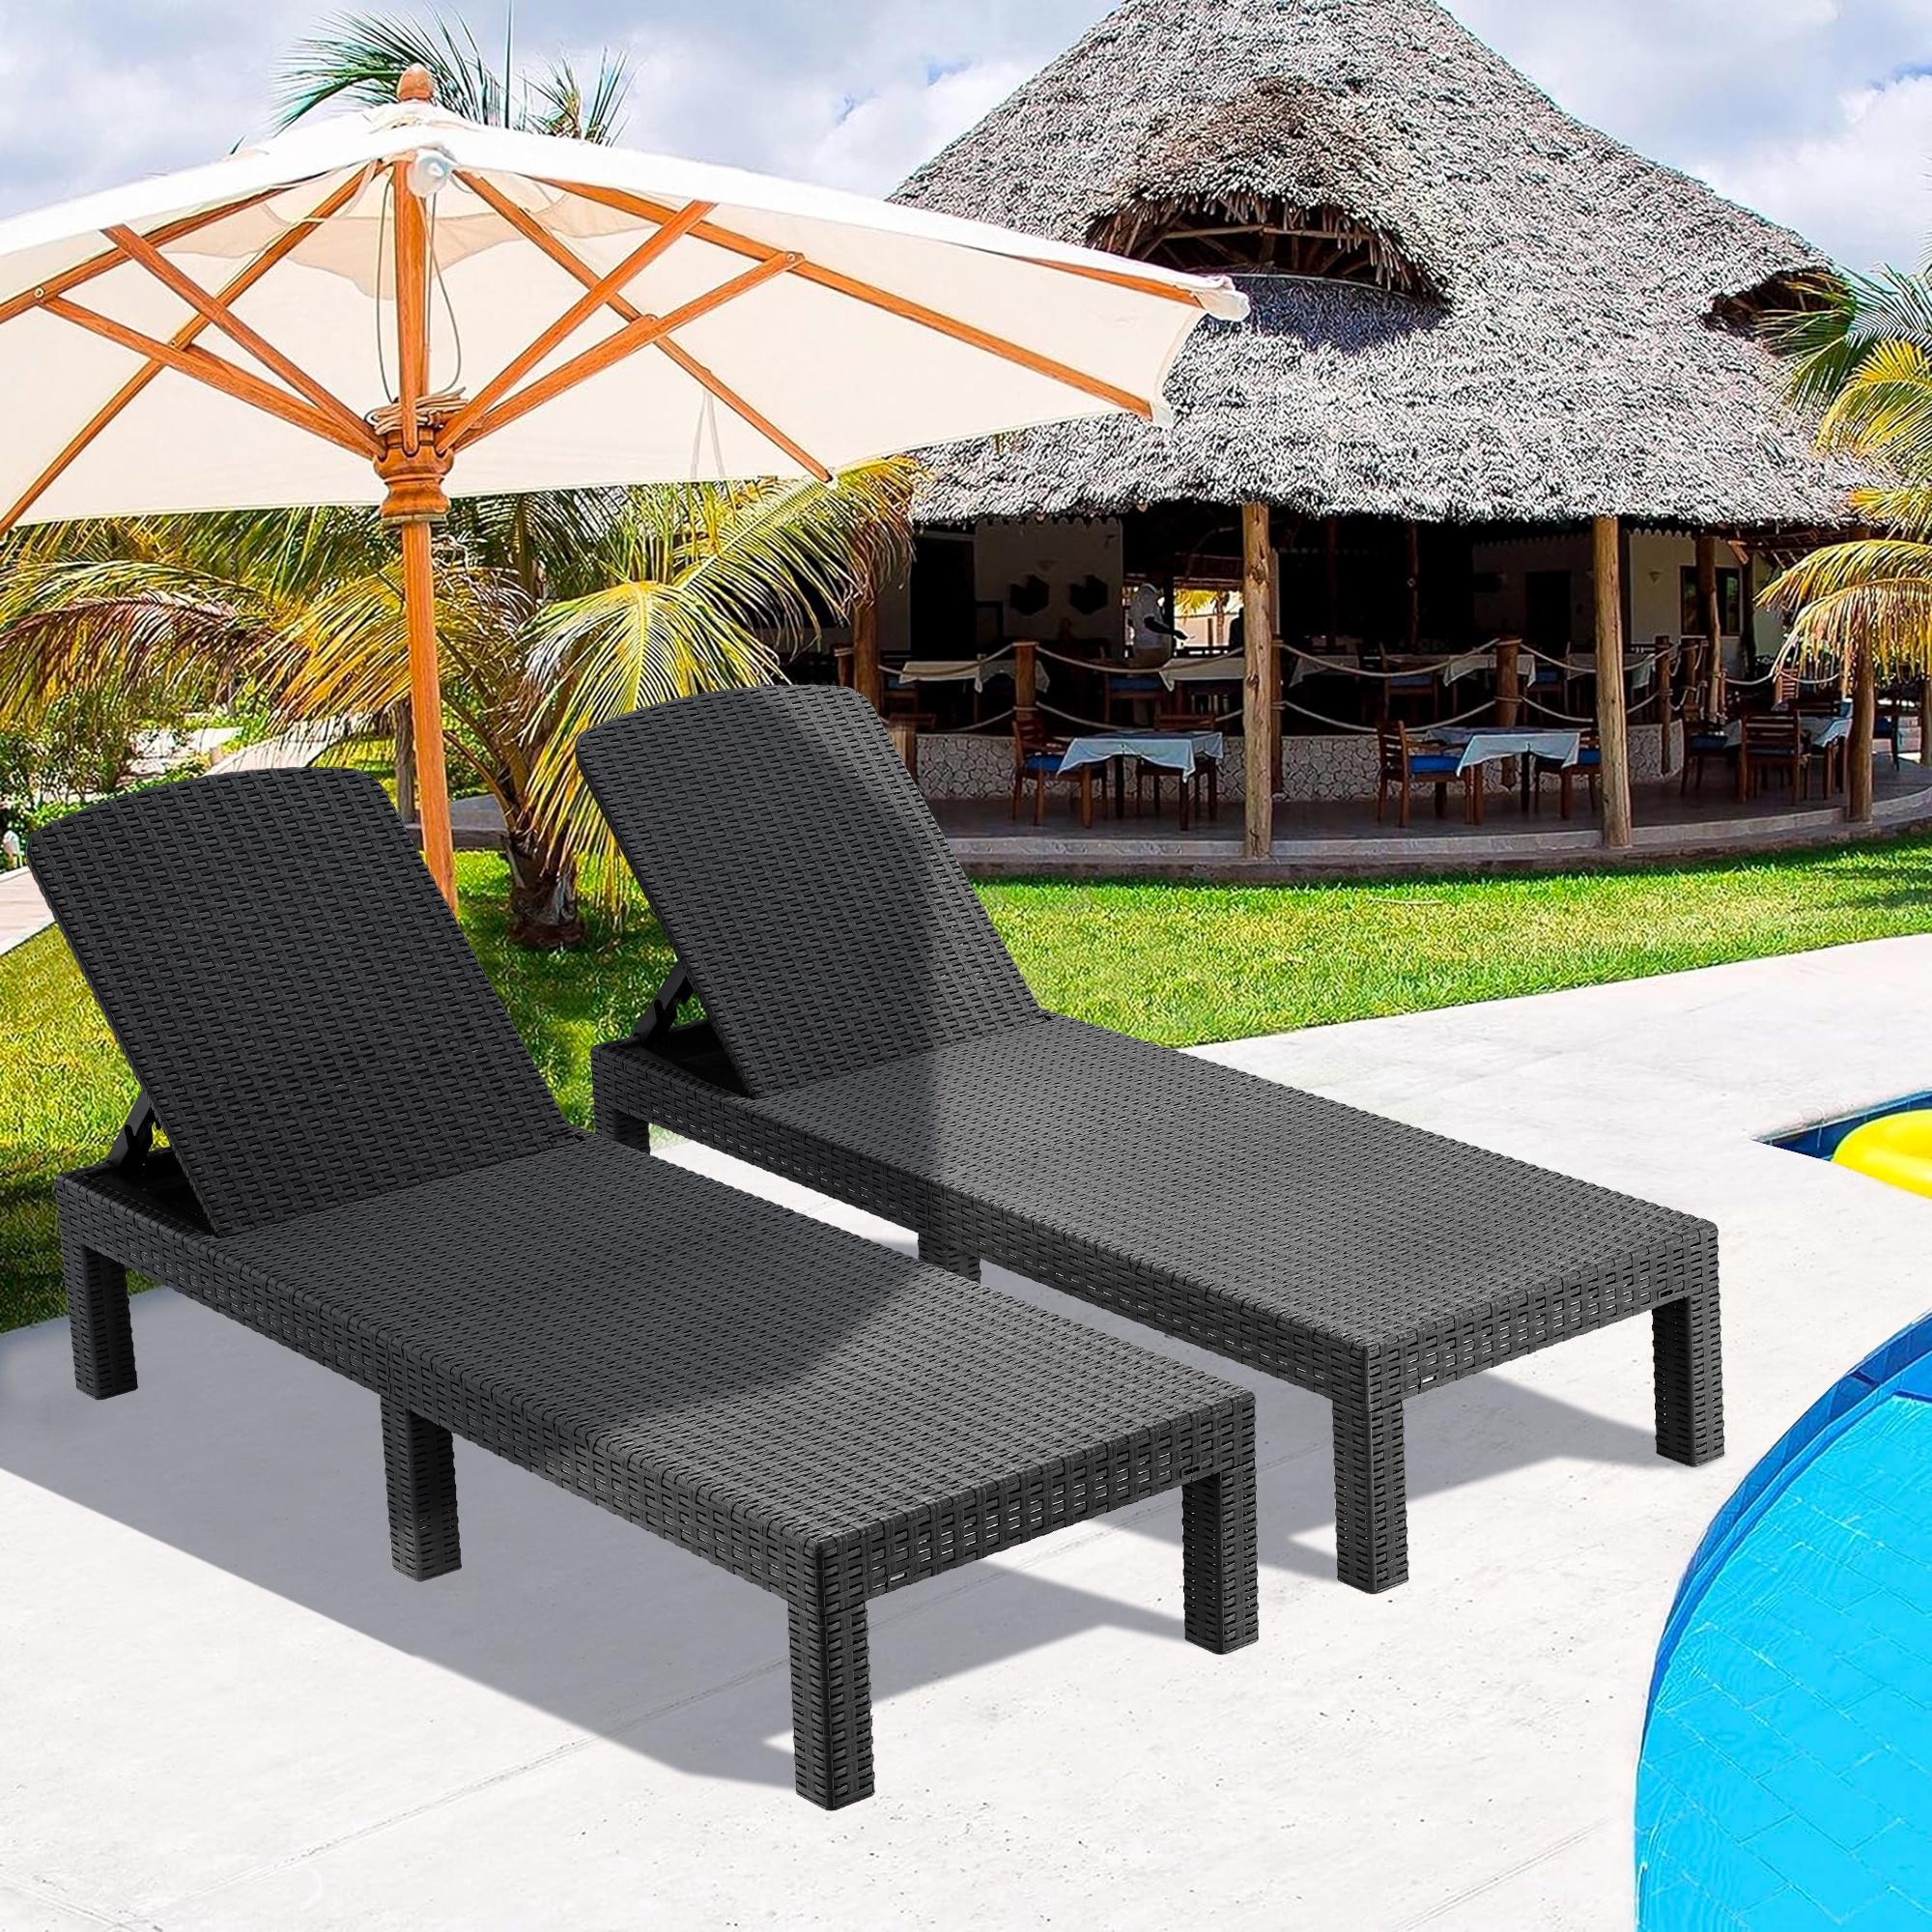 Chaise Lounge Set of 2, Patio Reclining Lounge Chairs with Adjustable Backrest, Outdoor All-Weather PP Resin Sun Loungers for Backyard, Poolside, Porch, Garden, Gray - image 3 of 10